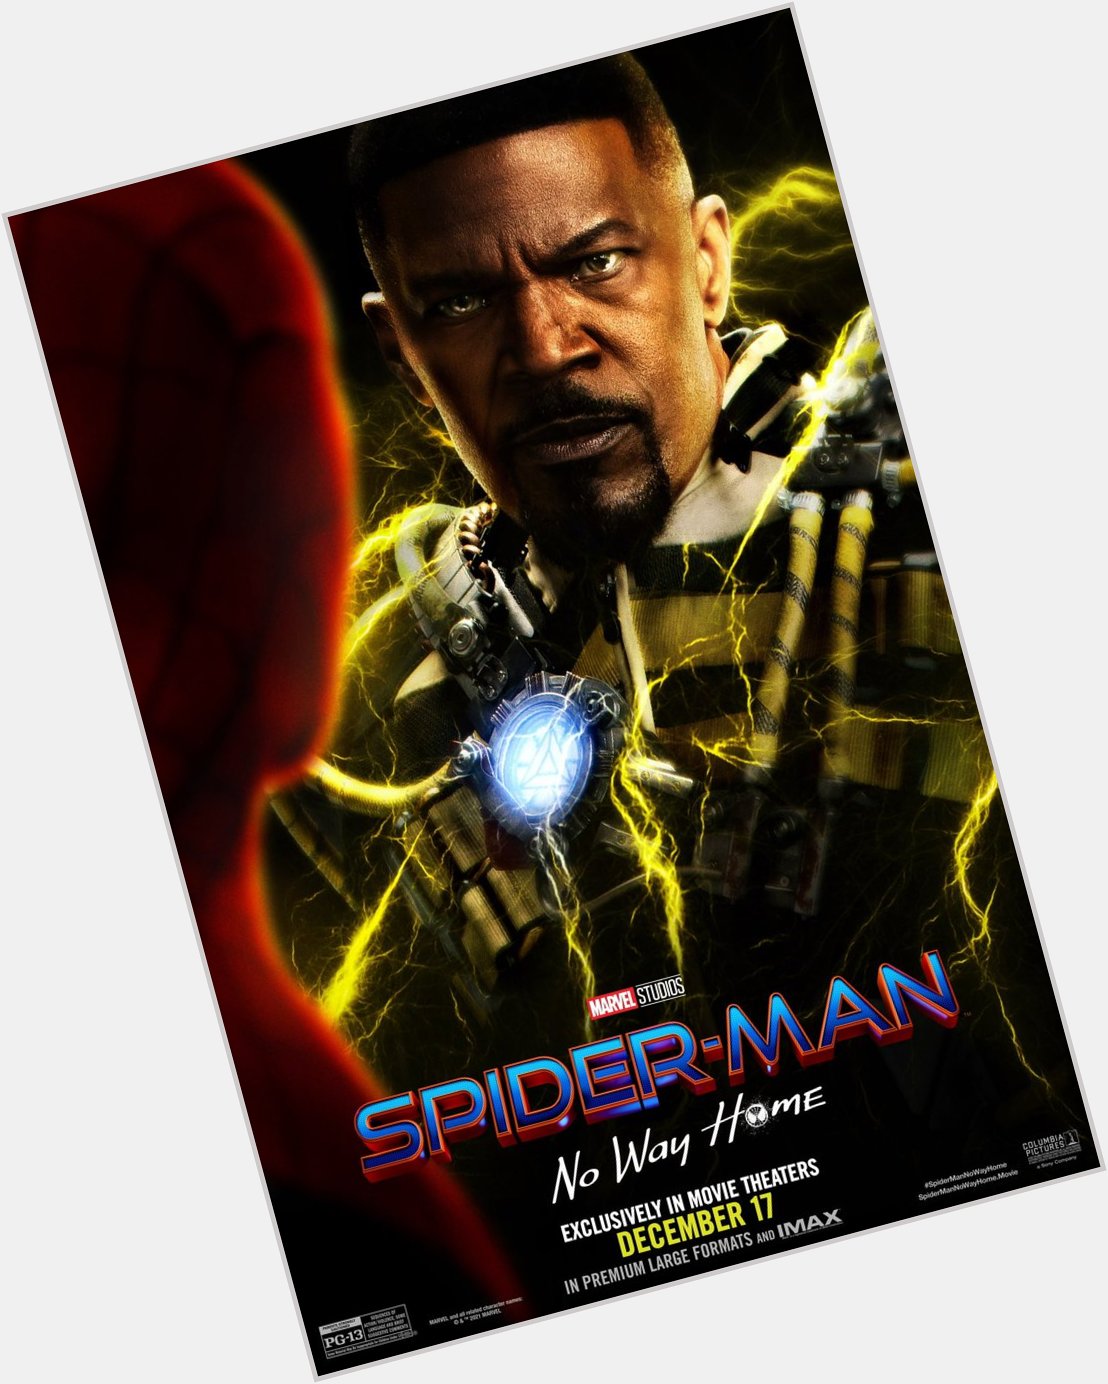 Happy birthday to Jamie Foxx! See him in theaters this week as Electro in 